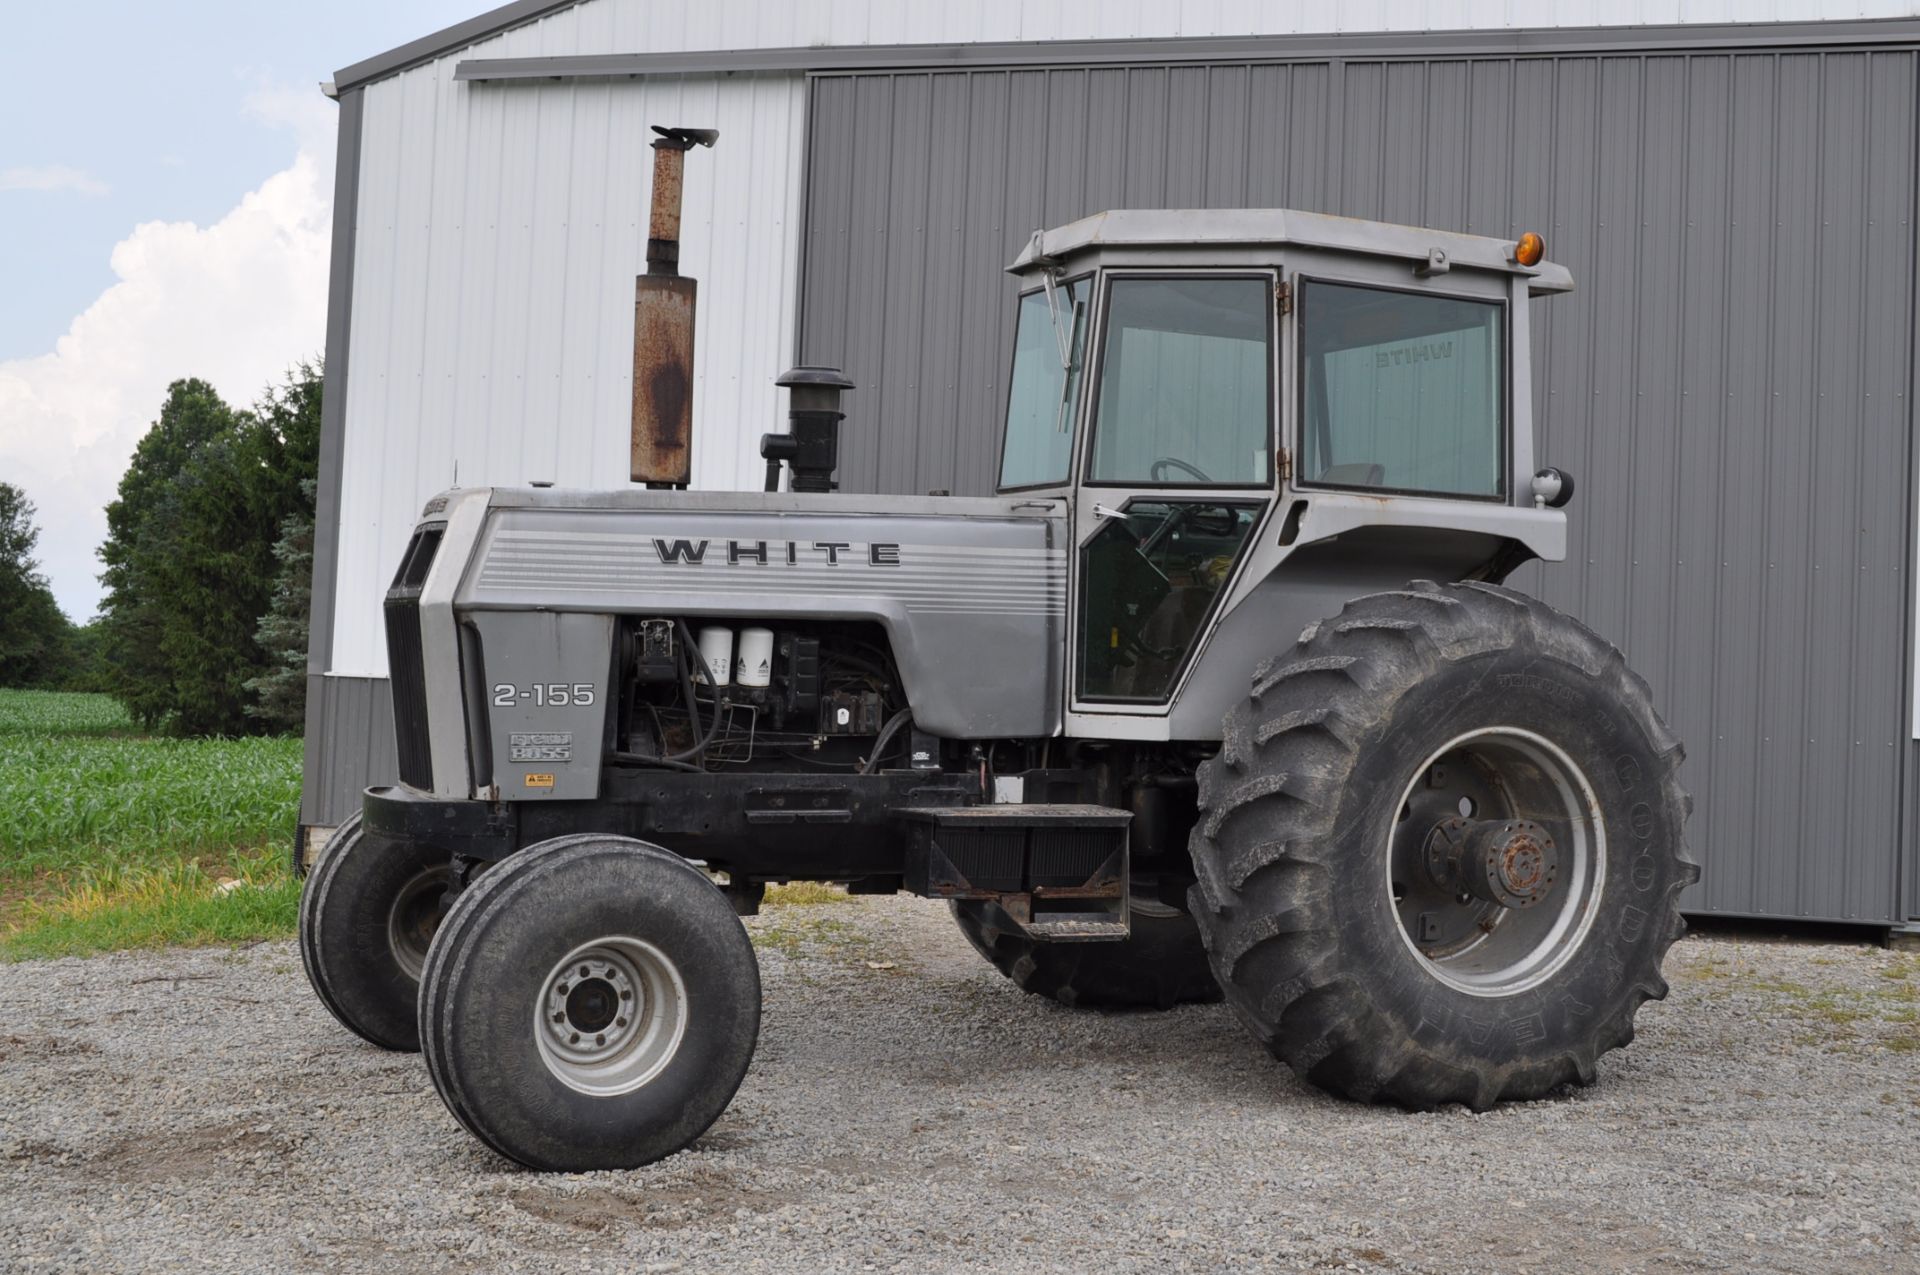 White 2-155 tractor, diesel, 24.5-32 rear, 14L-16.1 front, 3 pt, 3 hyd remotes, 1000 pto, C/H/A, - Image 30 of 31